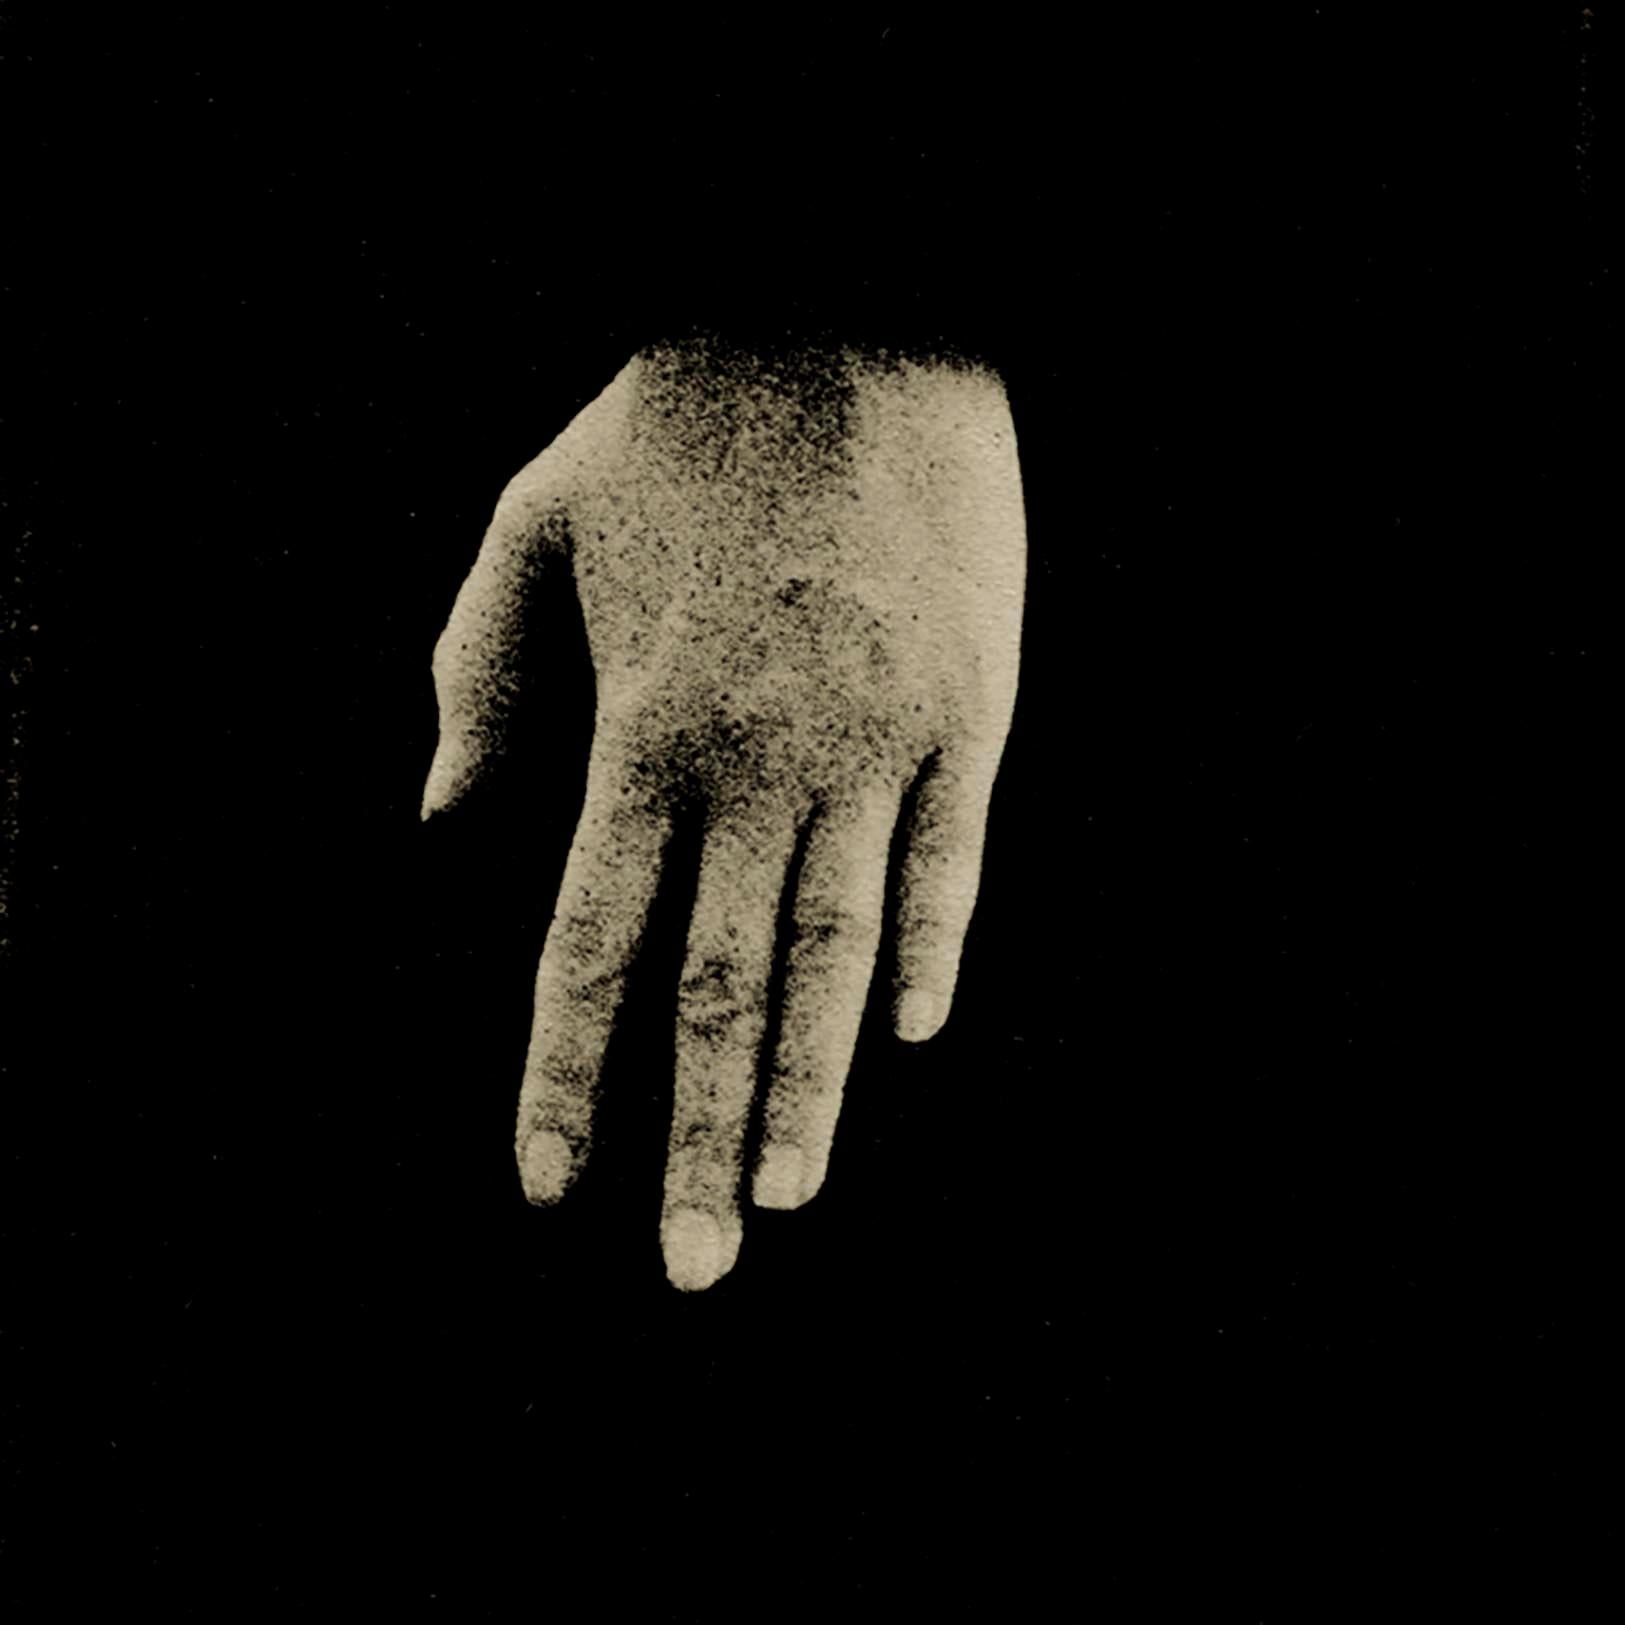 The Hand - Very rare figurative contemporary photography, silver gelatin, unique - Photograph by Osheen Harruthoonyan